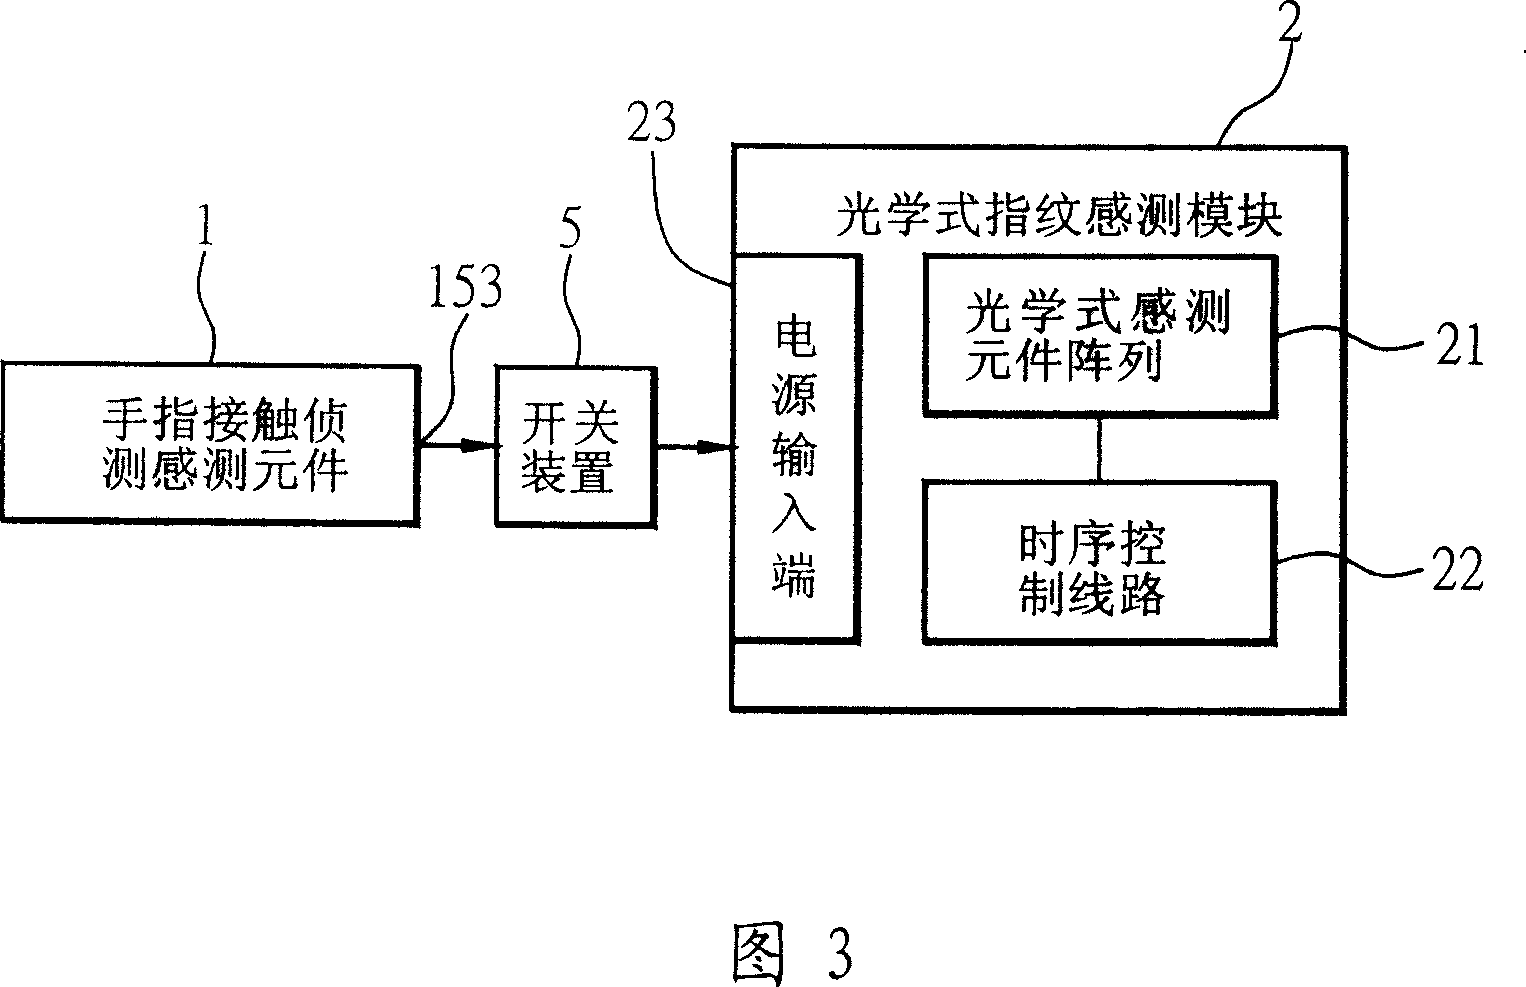 Optical fingerprint pick-up device with finger touch monitoring function and its method